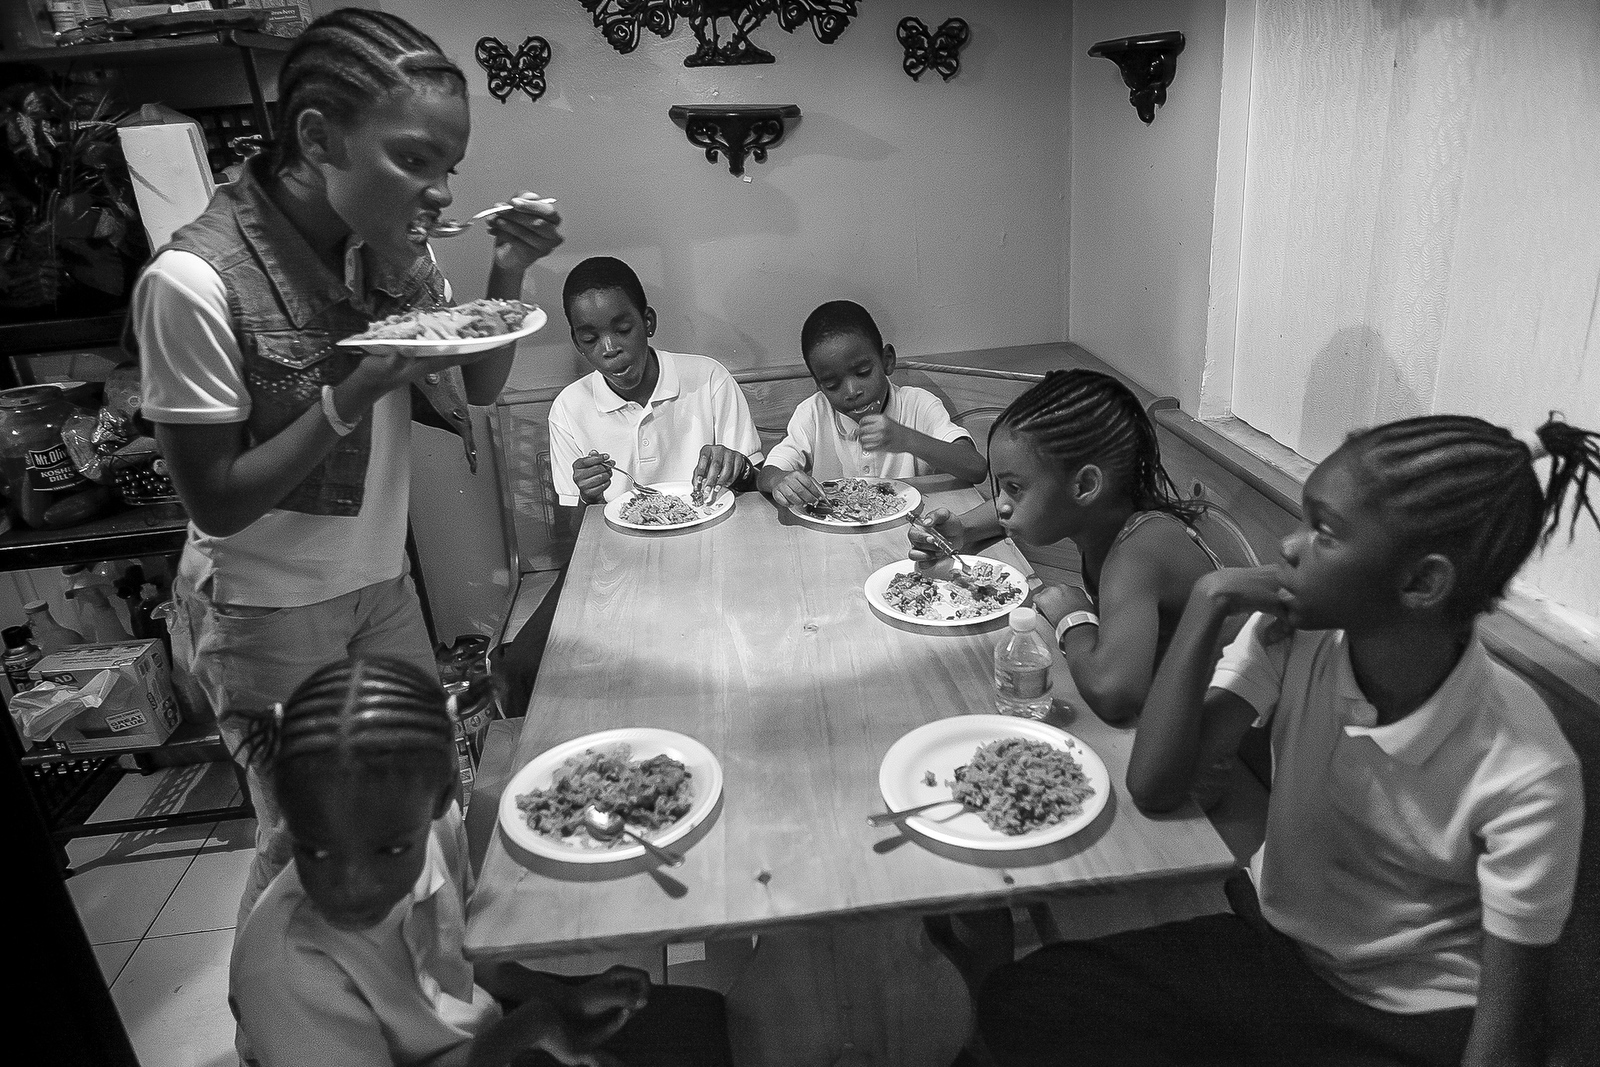  Part of the Fitzgerald family, left to right,&nbsp;Jernyah, Jermiah, Jermaine, Keyshawn, their cousin Joanna Fitzgerald and Jerqueriria squeeze around their grandmother Joann's kitchen table for dinner. Joann adopted six of her grandchildren and is 